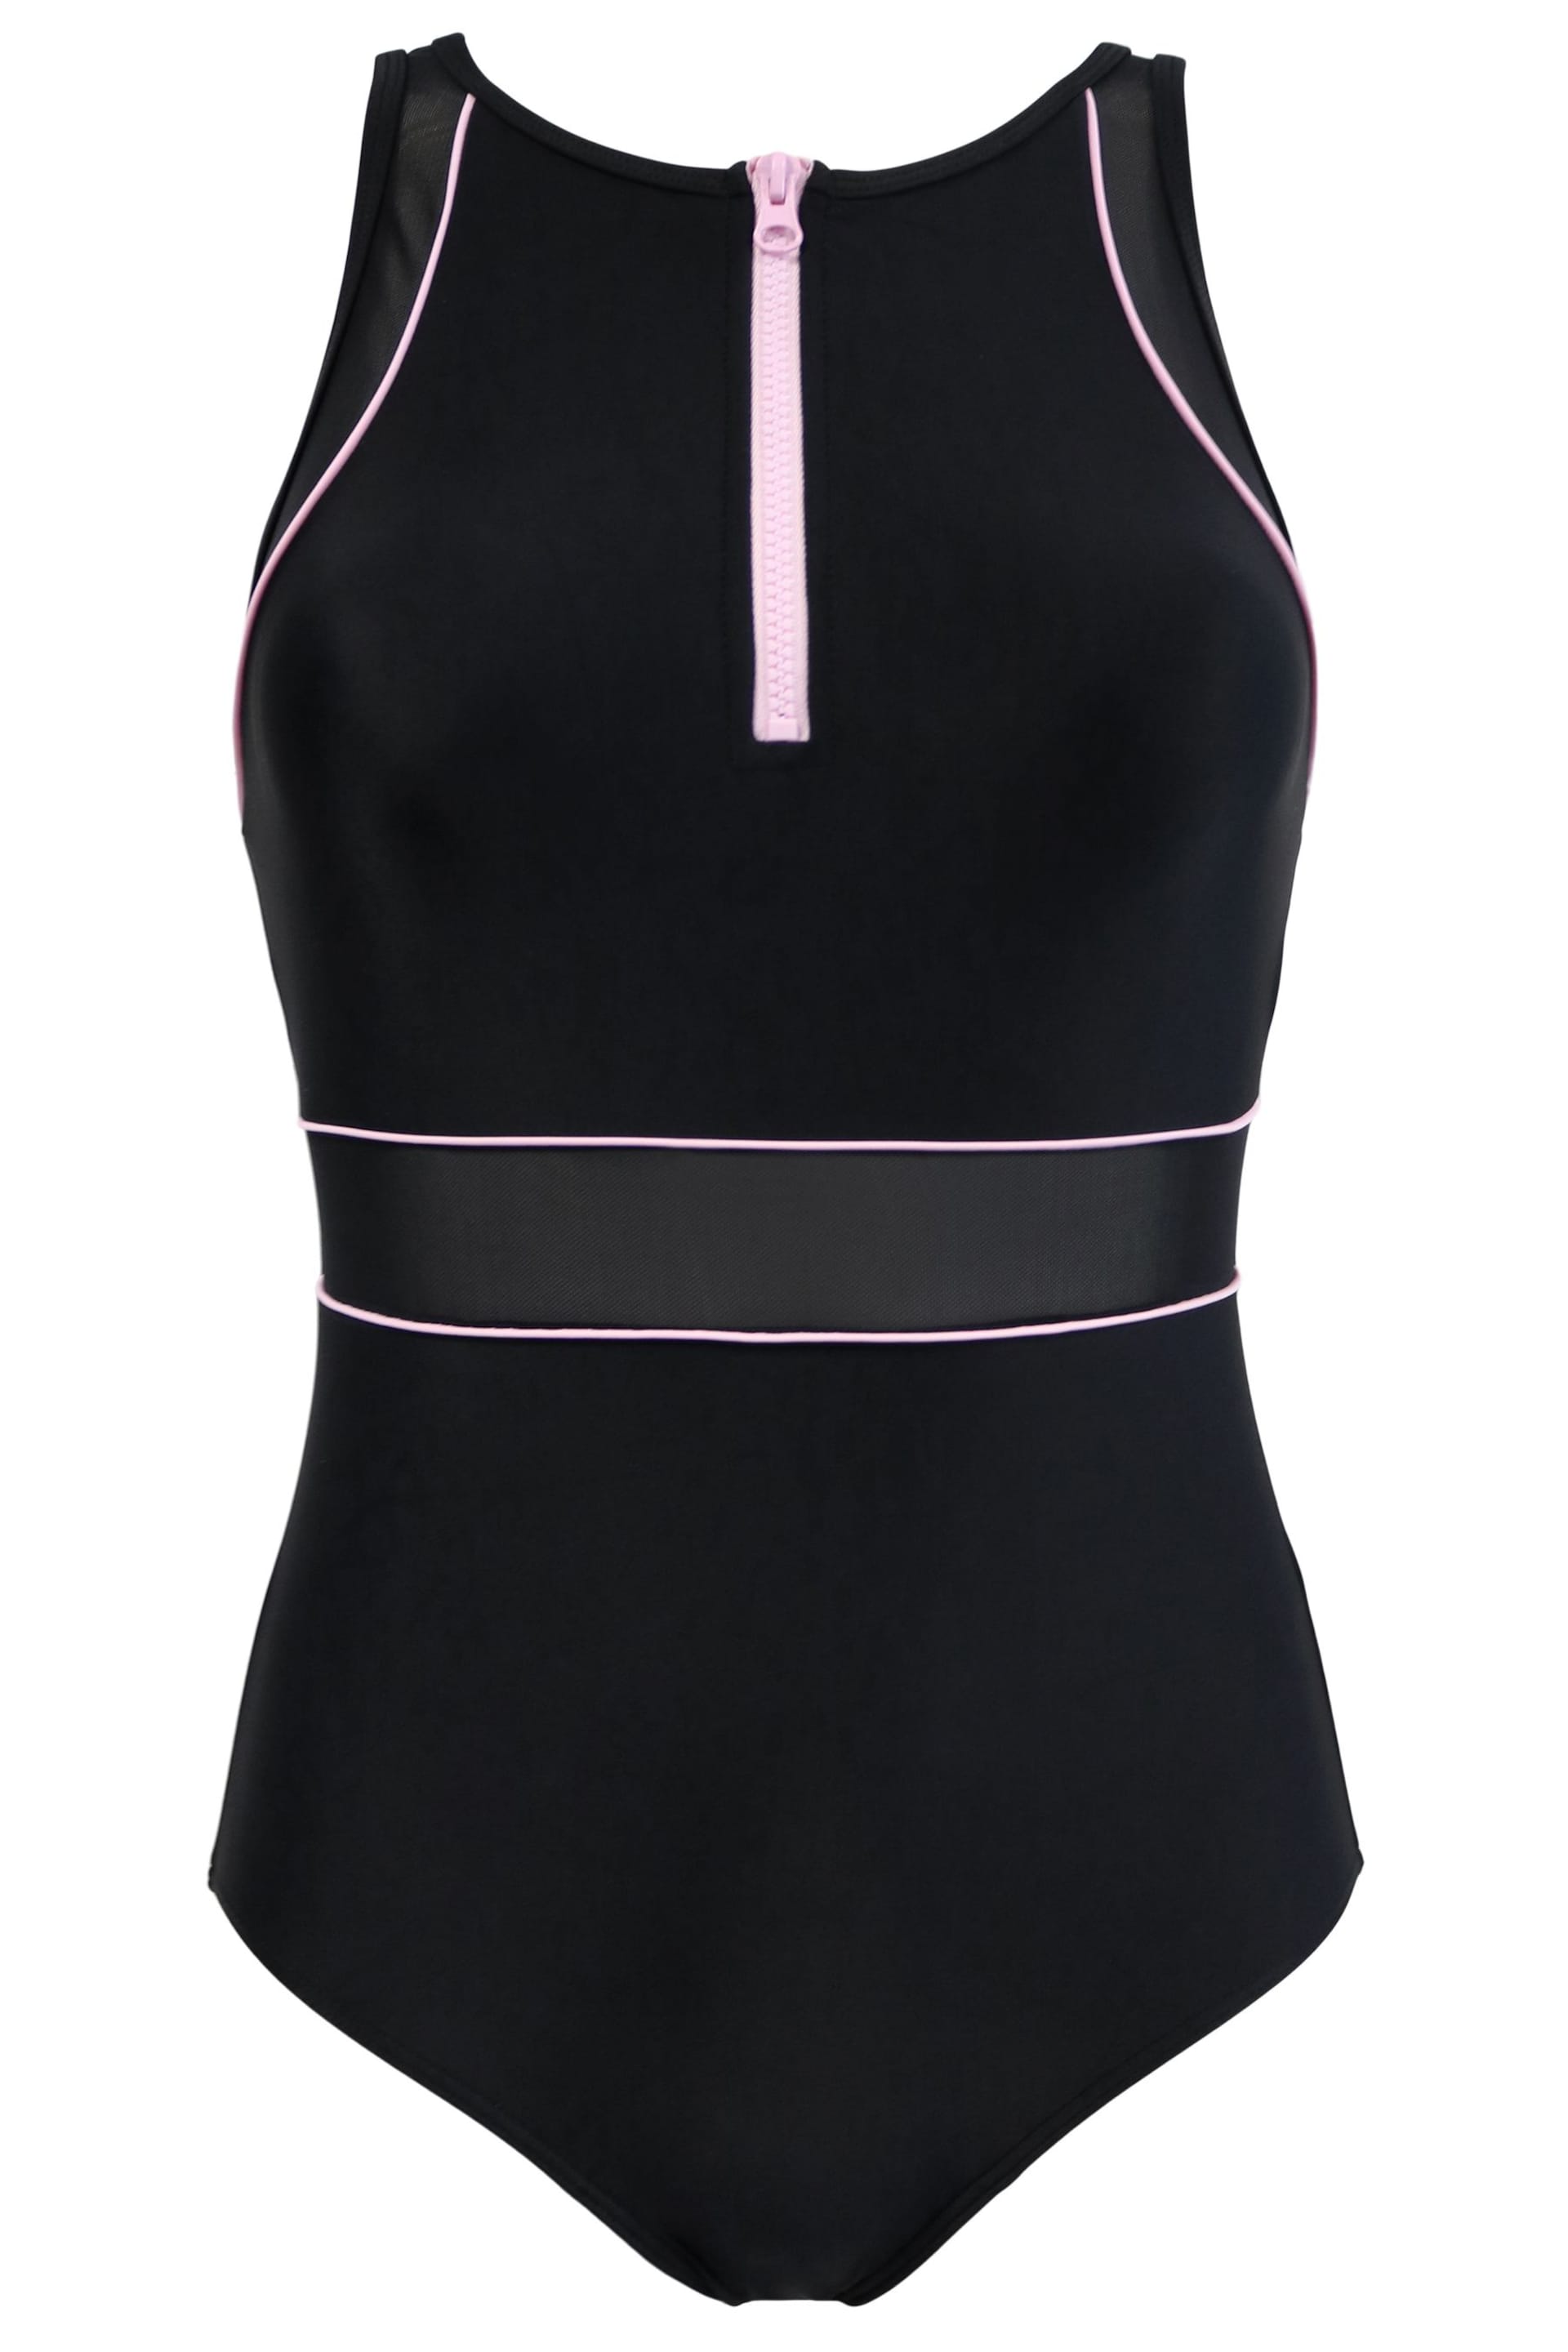 Pour Moi Black Energy Chlorine Resistant High Neck Zip Front Swimsuit - Image 4 of 5